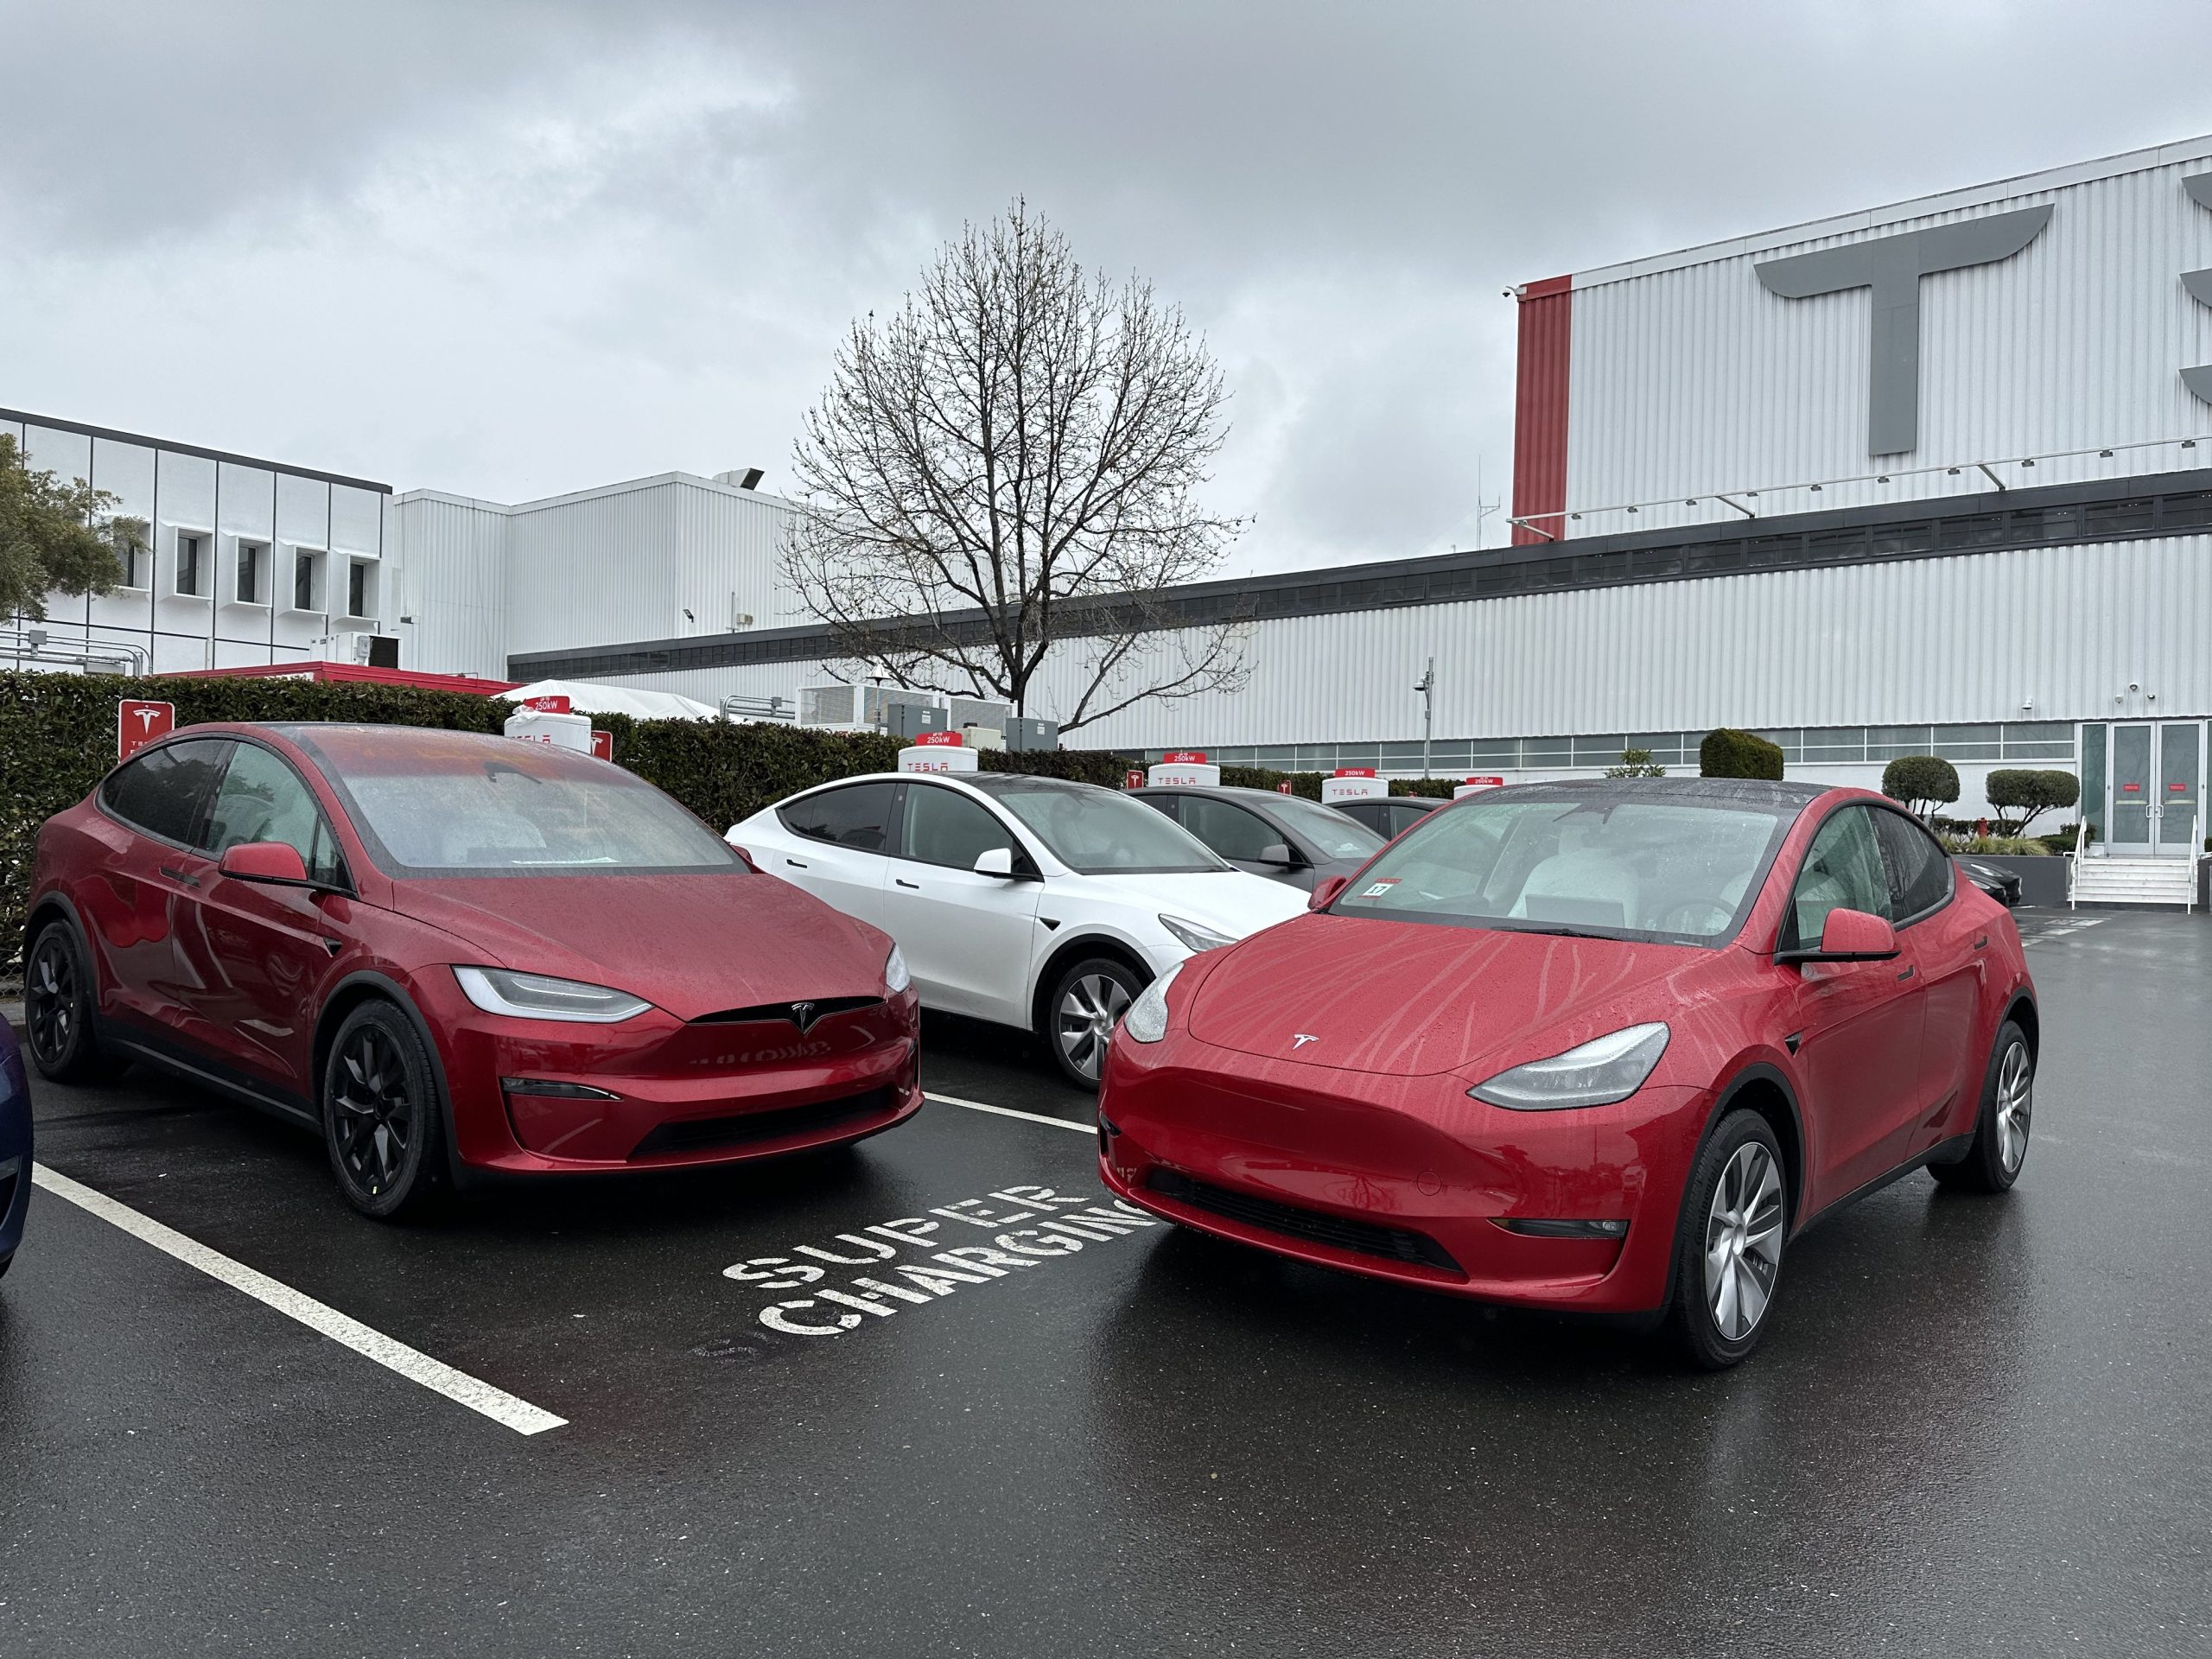 Tesla’s new Ultra Red color side-by-side with old Multicoat